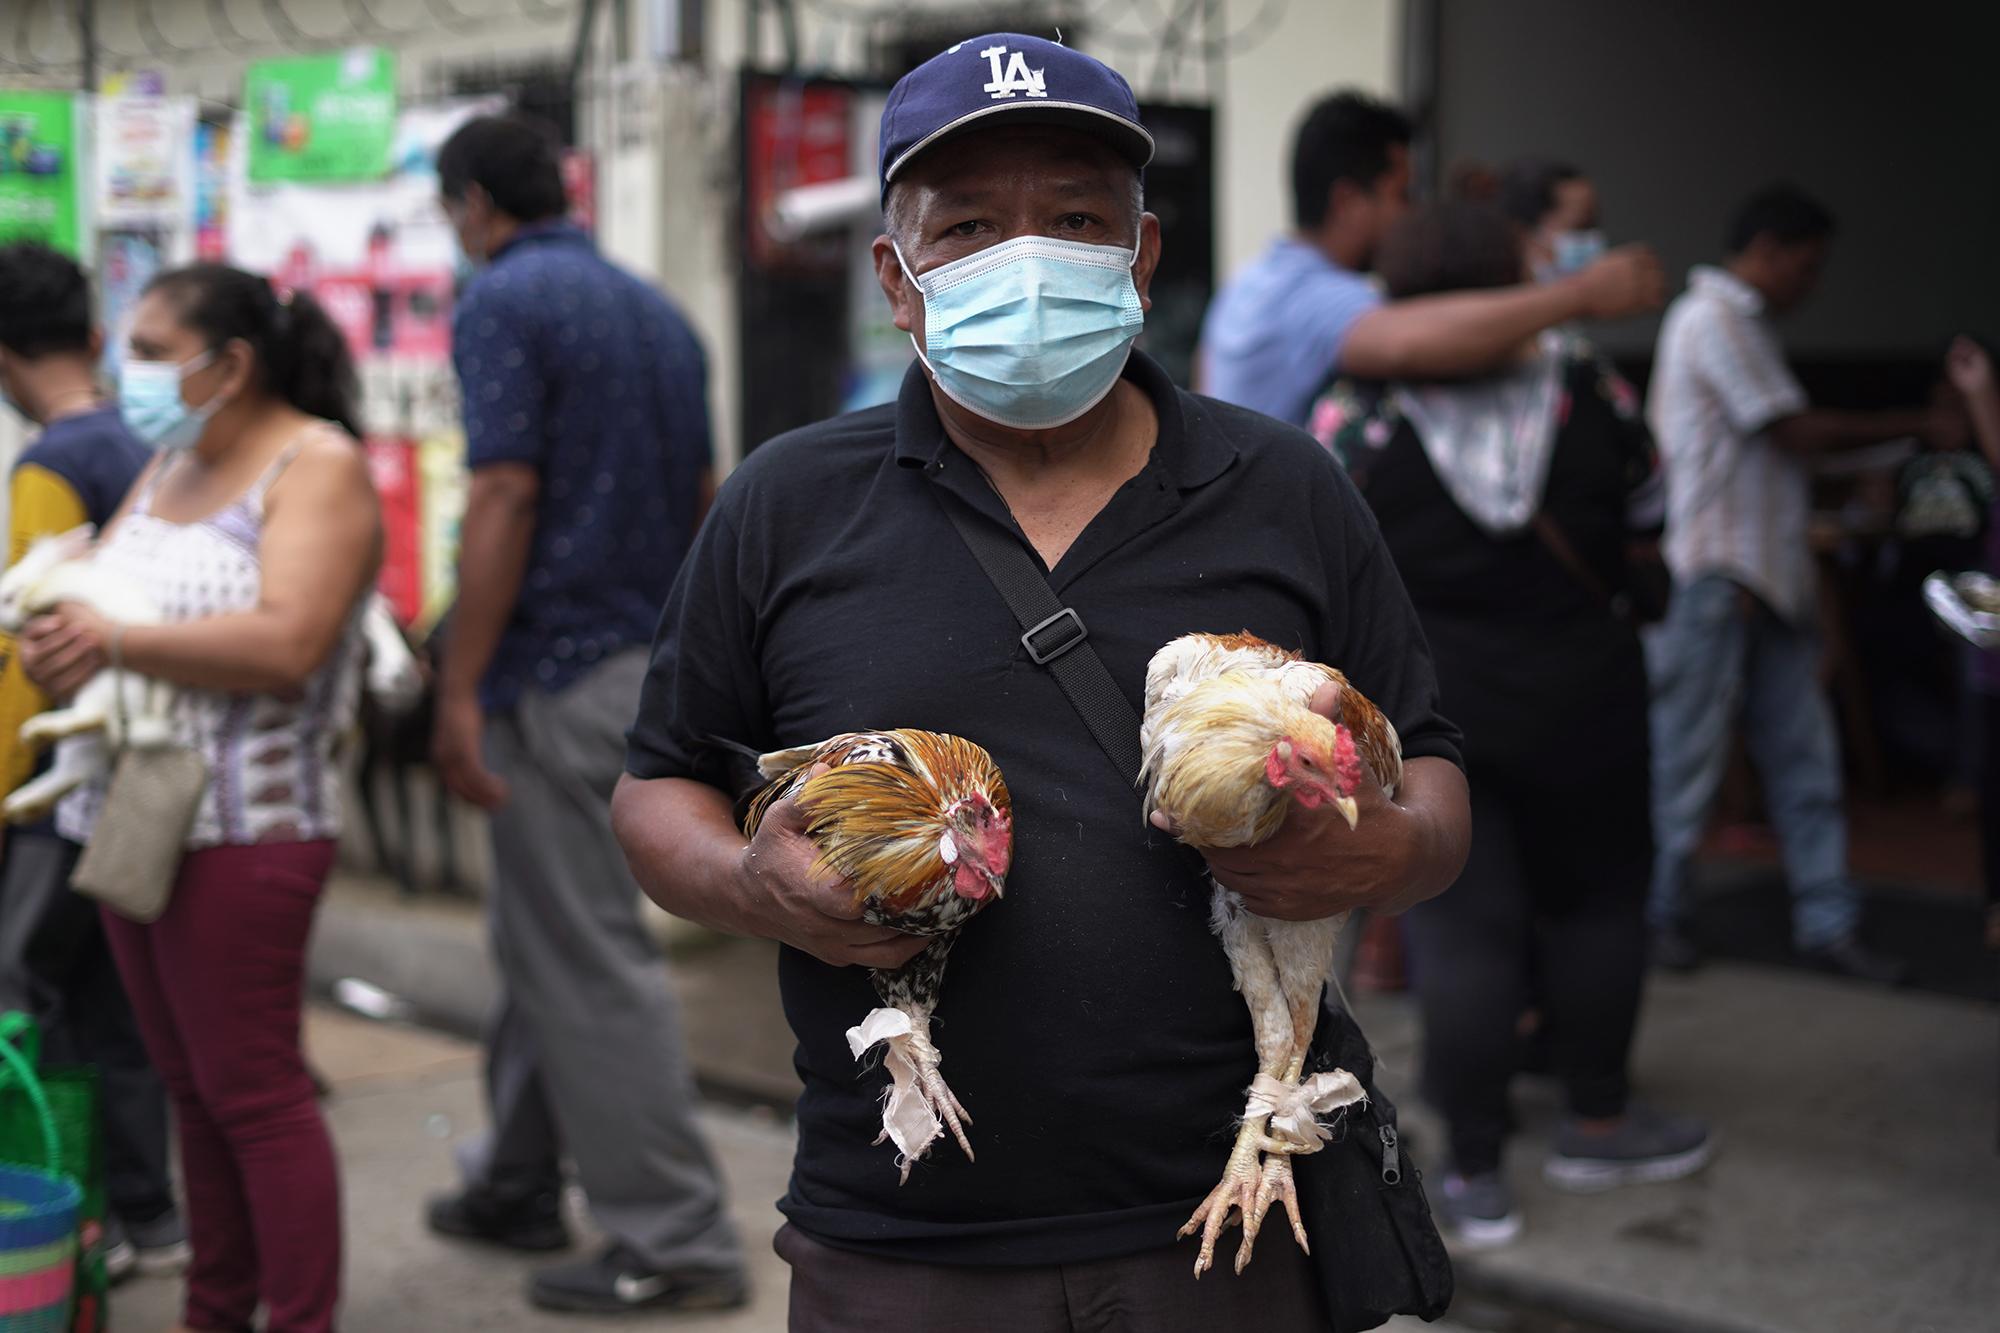 Teófilo García, 60, has worked for more than 18 years at the tiangue. Each Saturday he travels in public transportation with his miniature chickens, which sometimes perch on his shoulder. He charges $10 to $15 a bird. He comes from the municipality of San Martin. Teófilo assures that he has bartered when he can’t sell his birds. “I have also exchanged chickens for goats, ducks, and turkeys, and one time I exchanged a turkey for a parakeet,” he says.